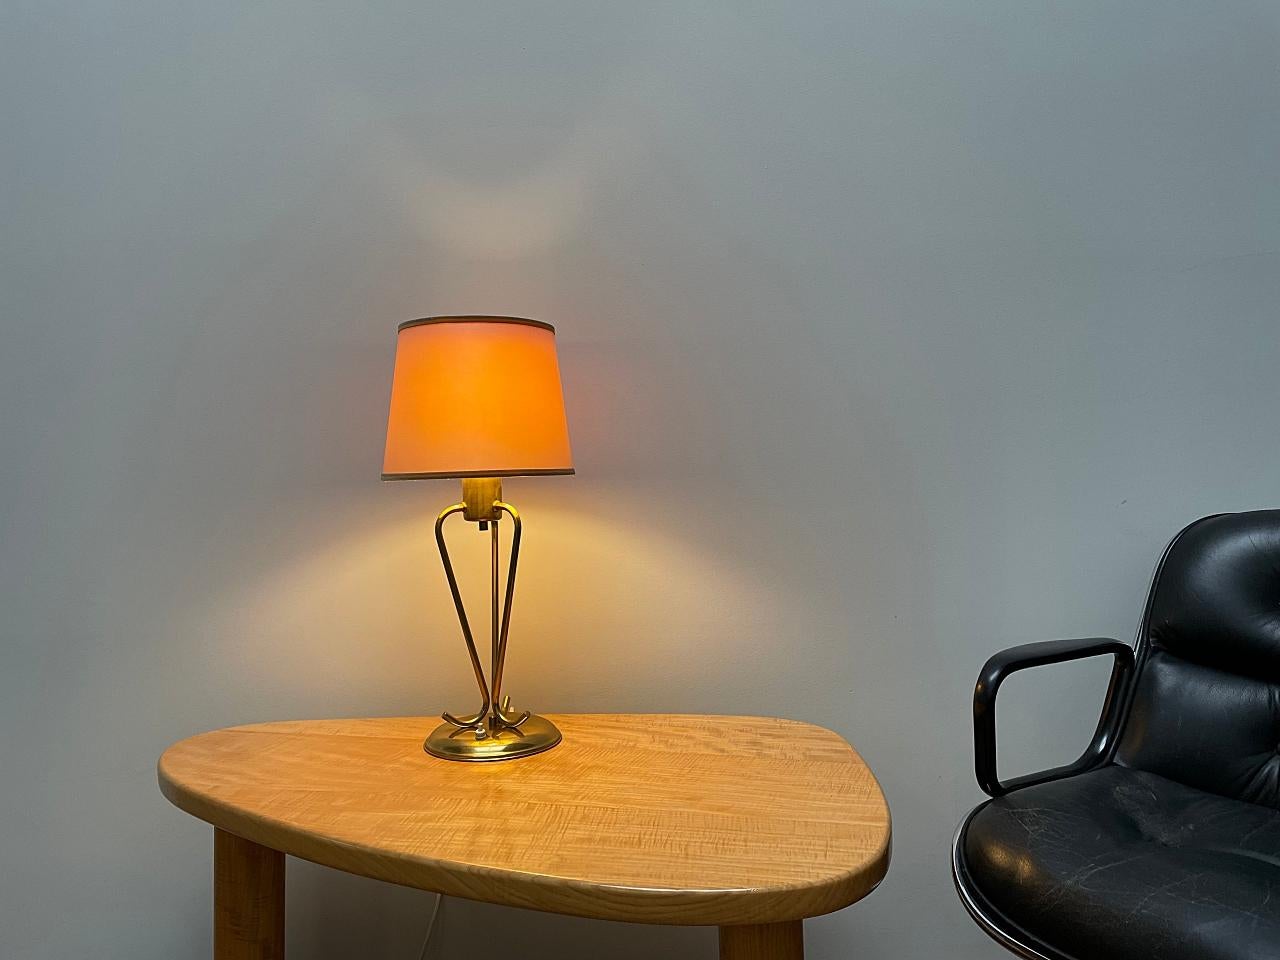 Elegant midcentury modern table lamp, manufactured by J.T. Kalmar in Austria, Vienna. 
The lamp is made of polished brass base in manner of Josef Frank, who worked many years with Kalmar. The lampshade provide smooth and wonderful light. The lamp is